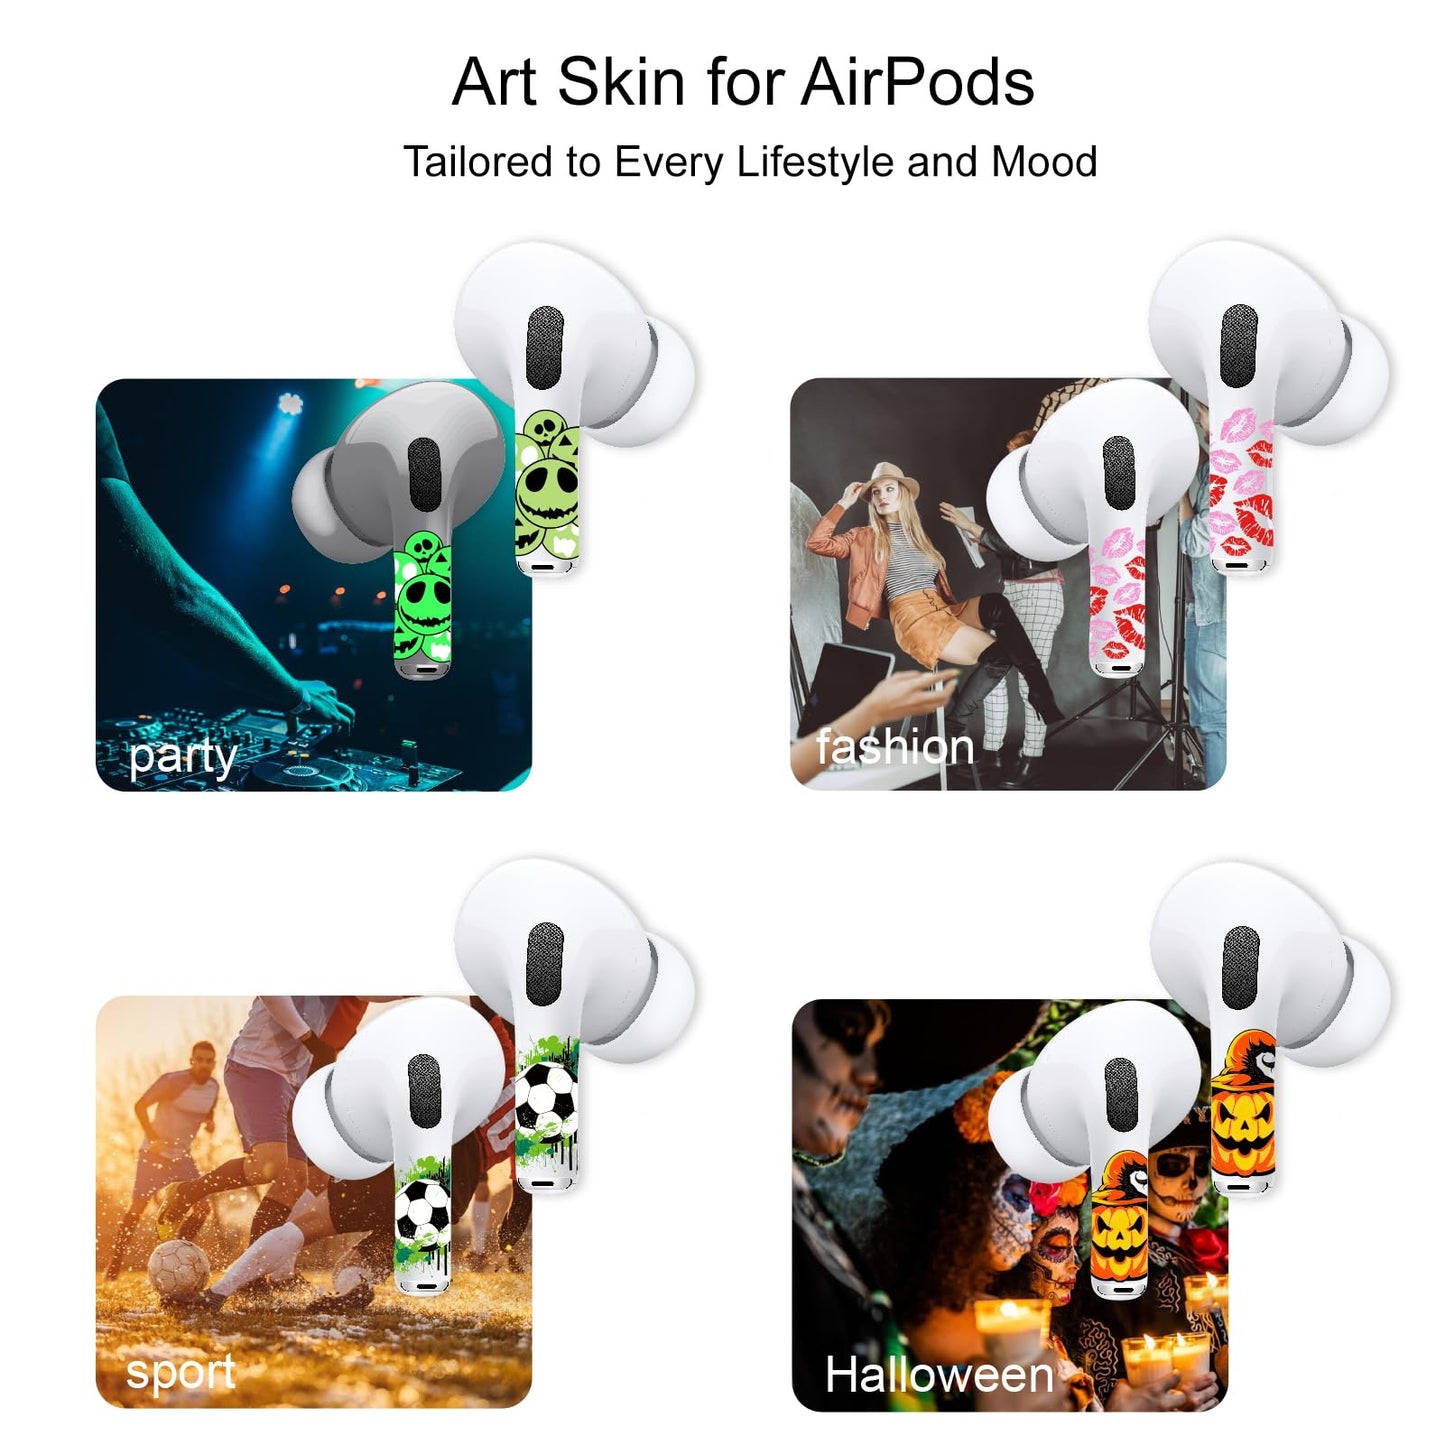 ROCKMAX for AirPods Pro 2 Skin Accessories, Yellow Deer Christmas Decor Sticker Wrap for Men, Women, Boys and Girls Gift, Unique Tattoos Compatible to AirPods Pro 2nd Generation Case Cover